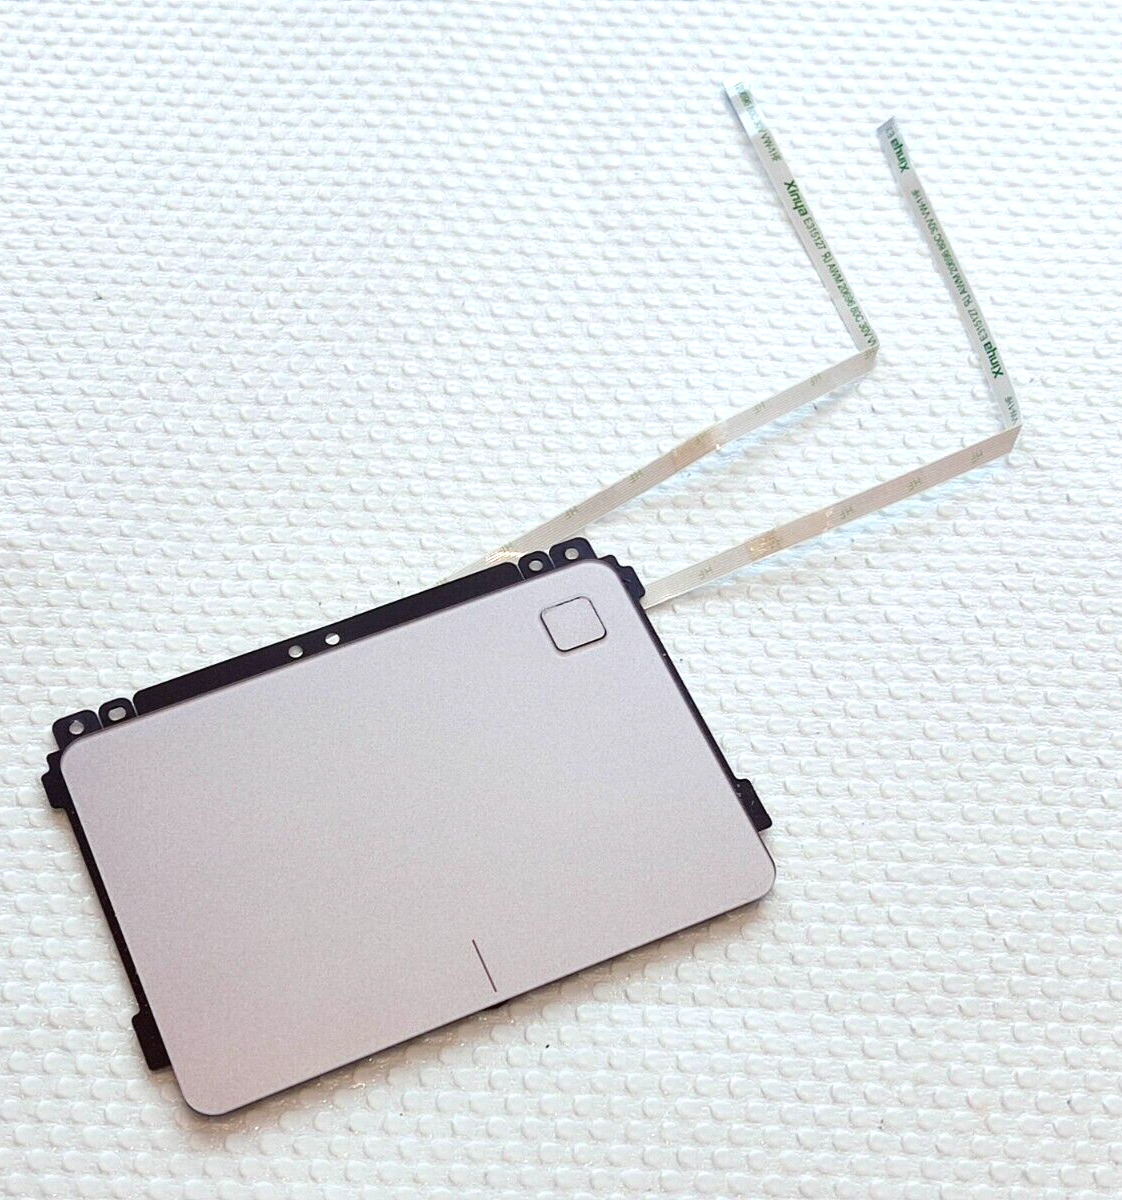 Original ASUS Zenbook UX330C UX330CA Laptop Touchpad Trackpad + Two Cables